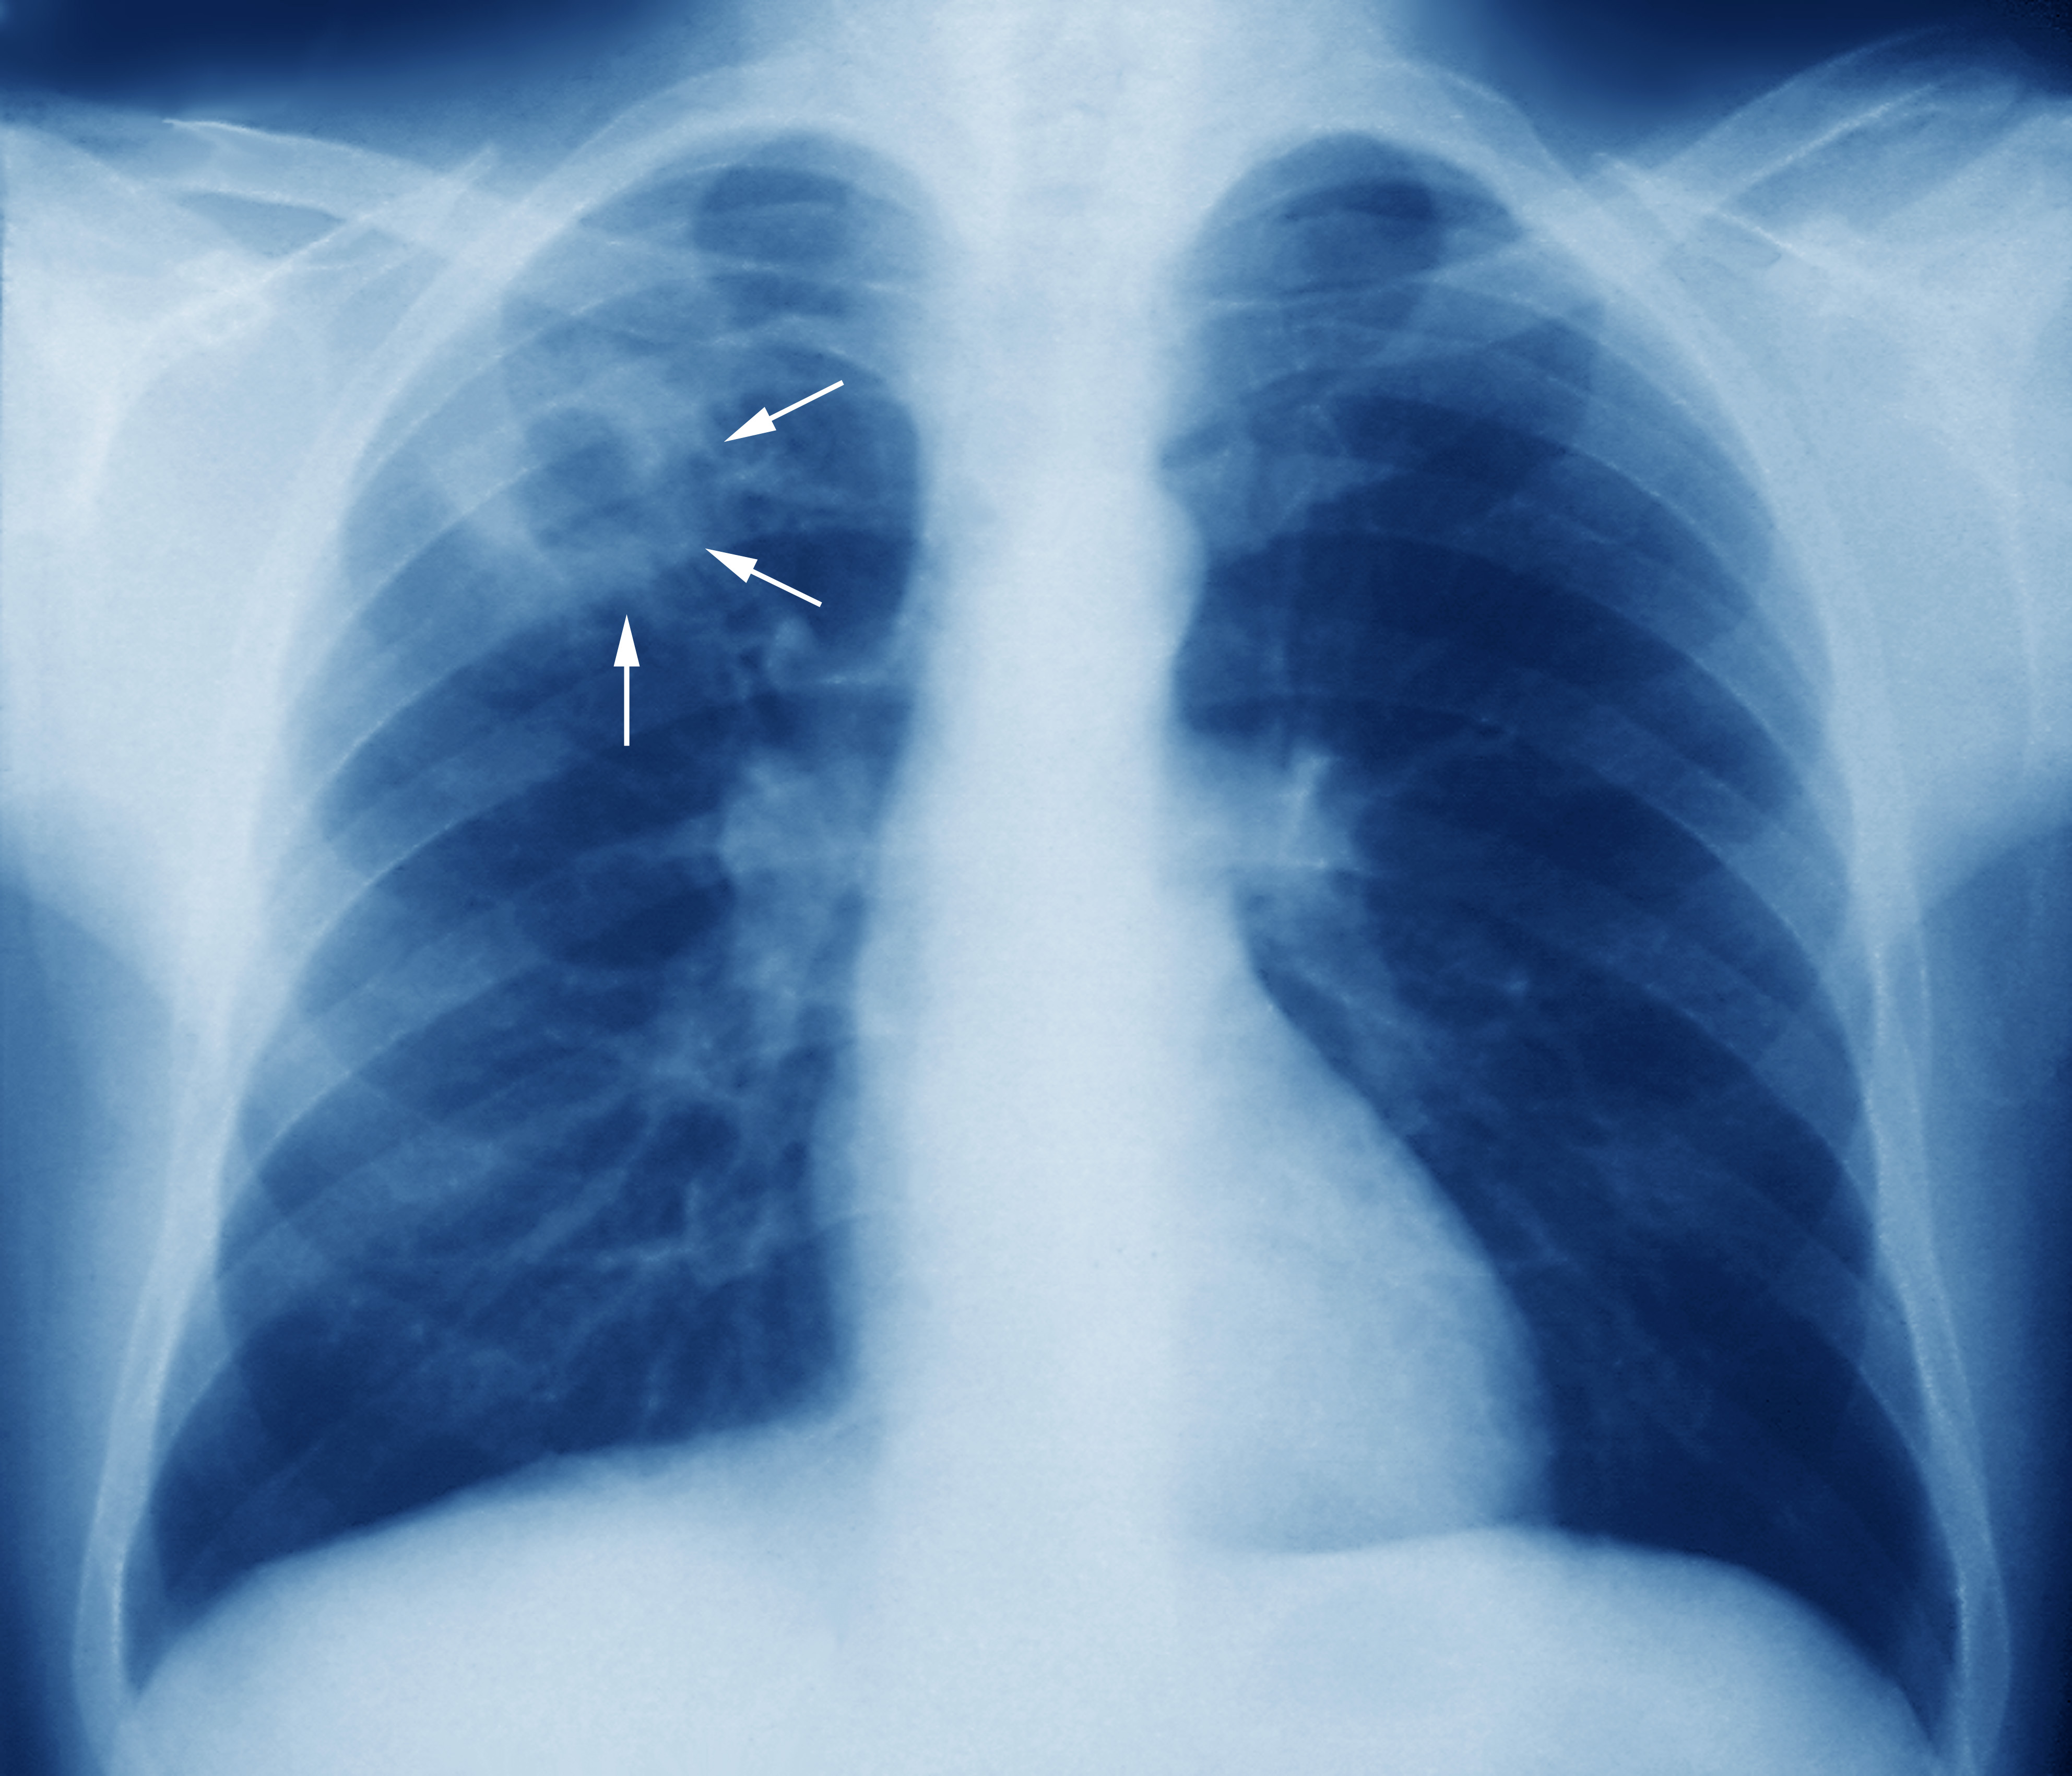 http://mednorge.com/wp-content/uploads/2020/12/m2700245-tuberculosis-chest-x-ray-science-photo-library-high.jpg